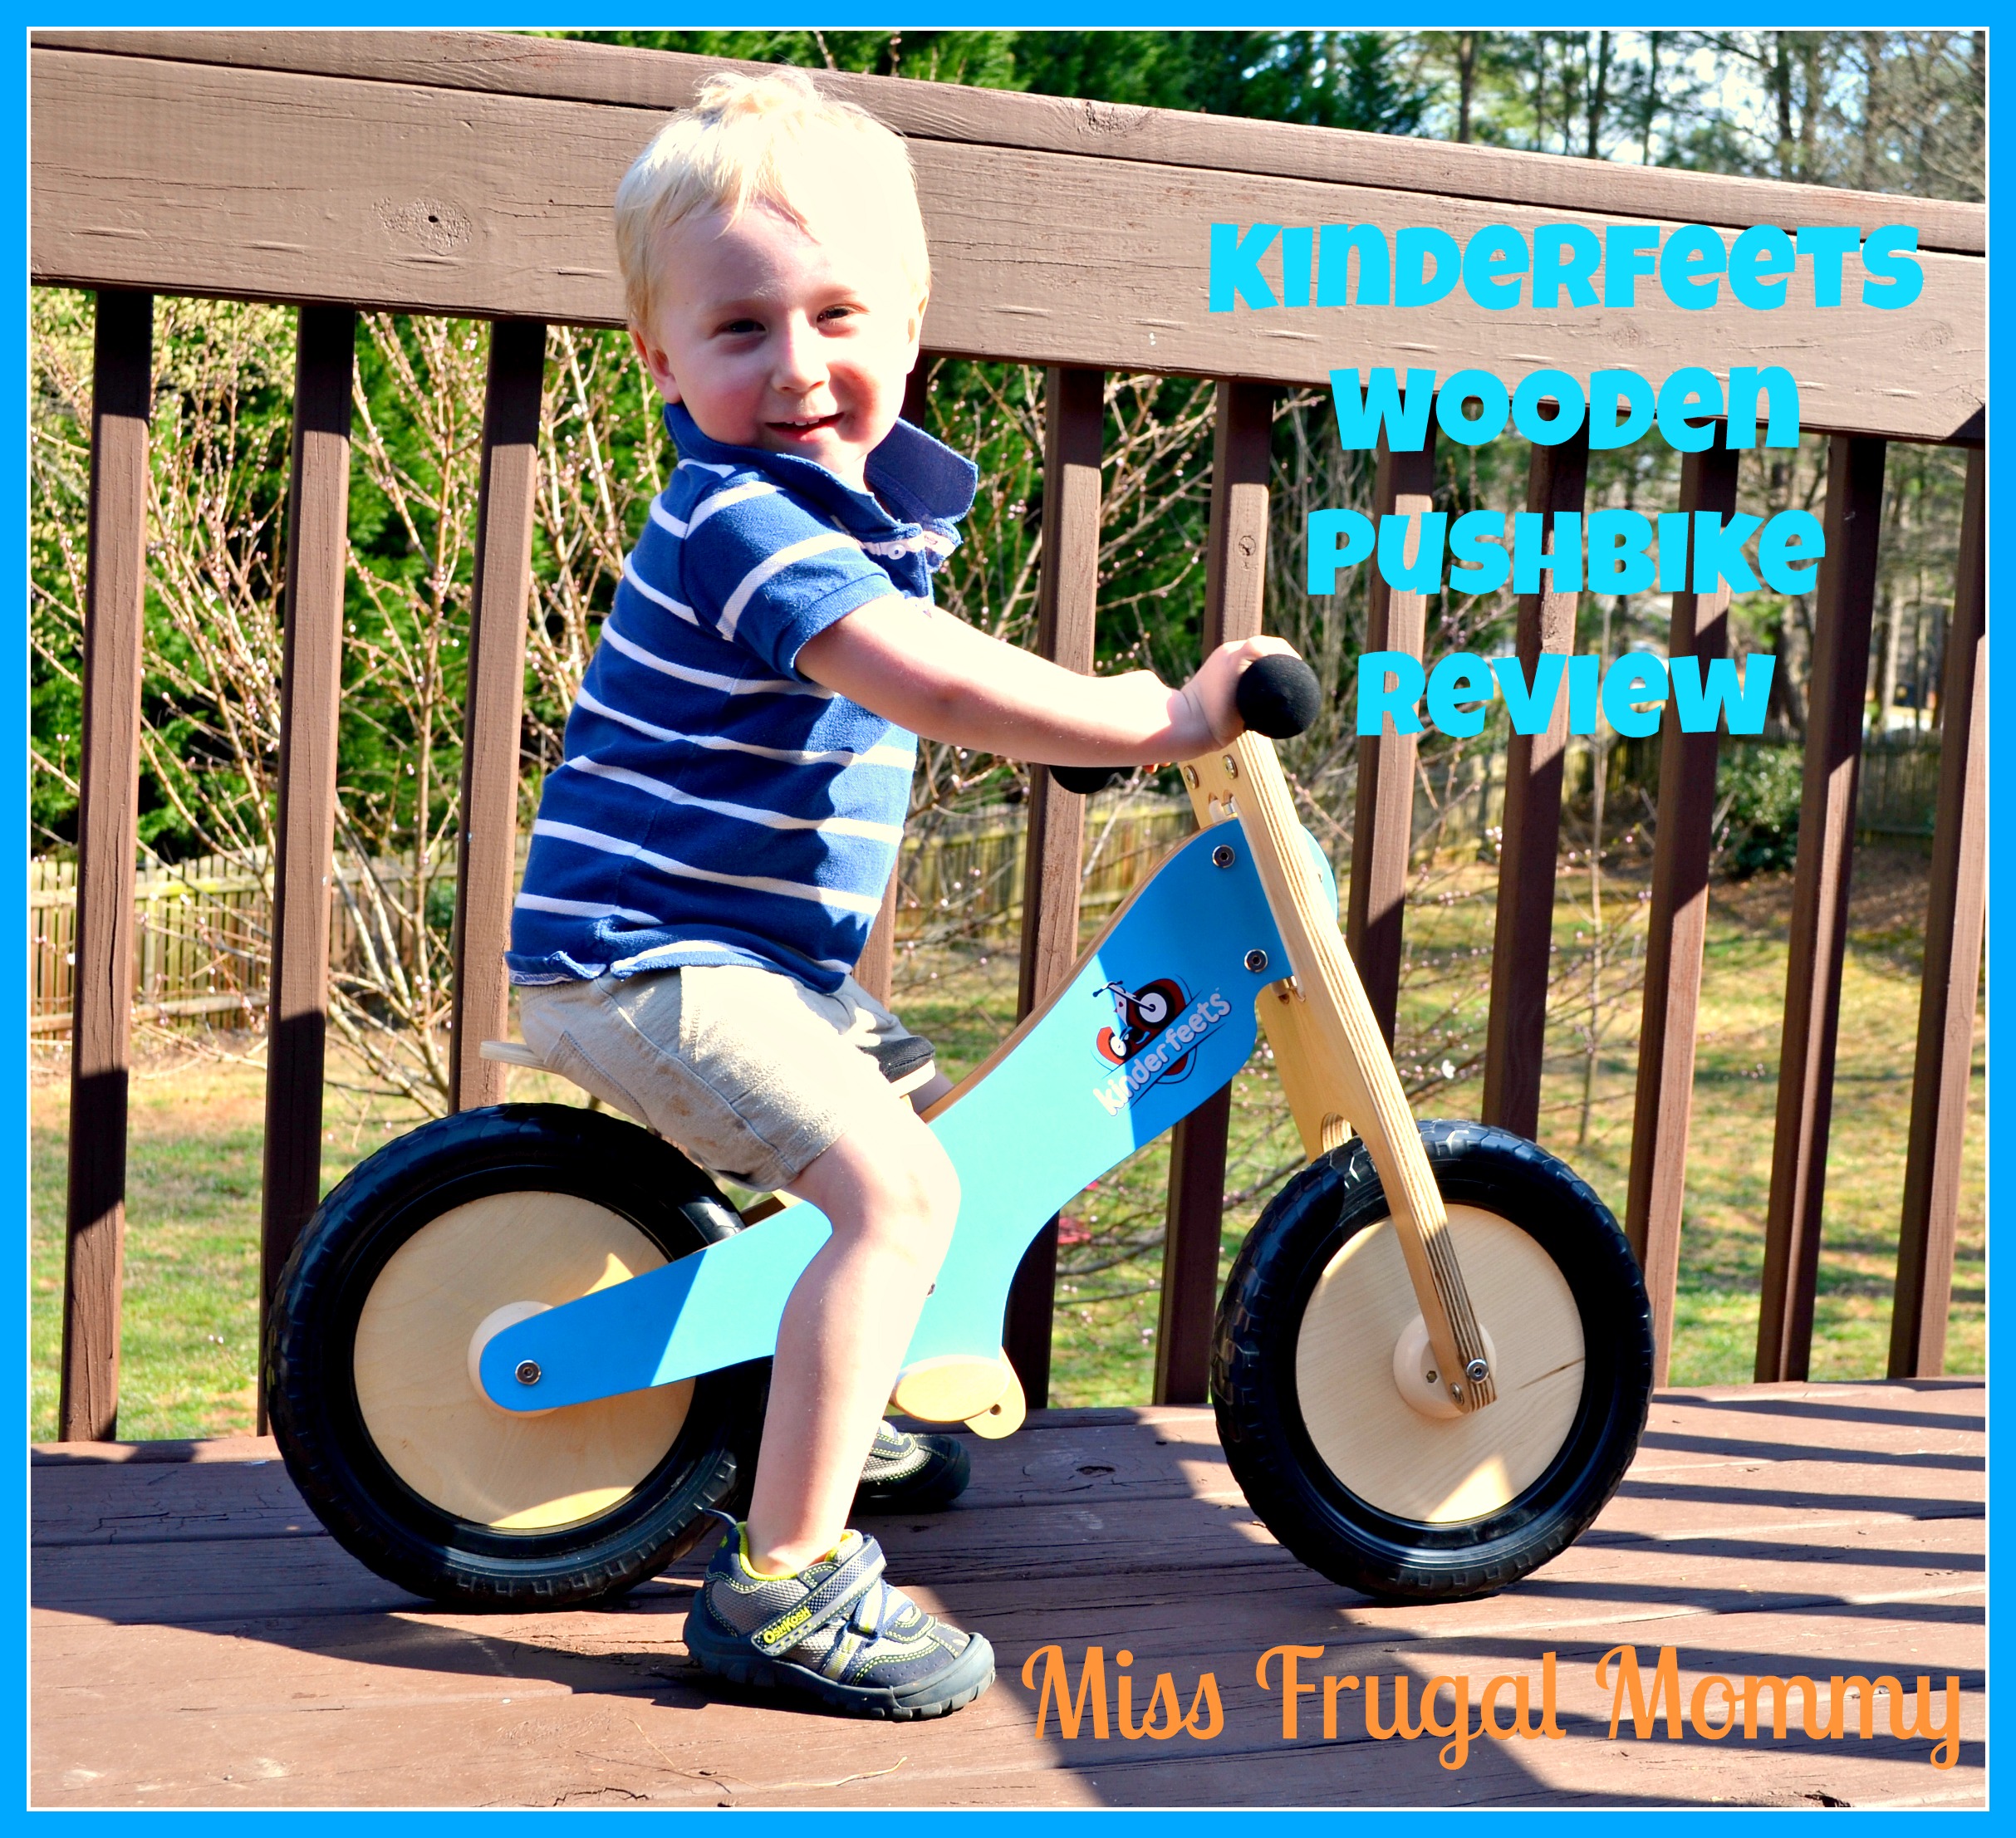 Kinderfeets: The Wooden Pushbike Review